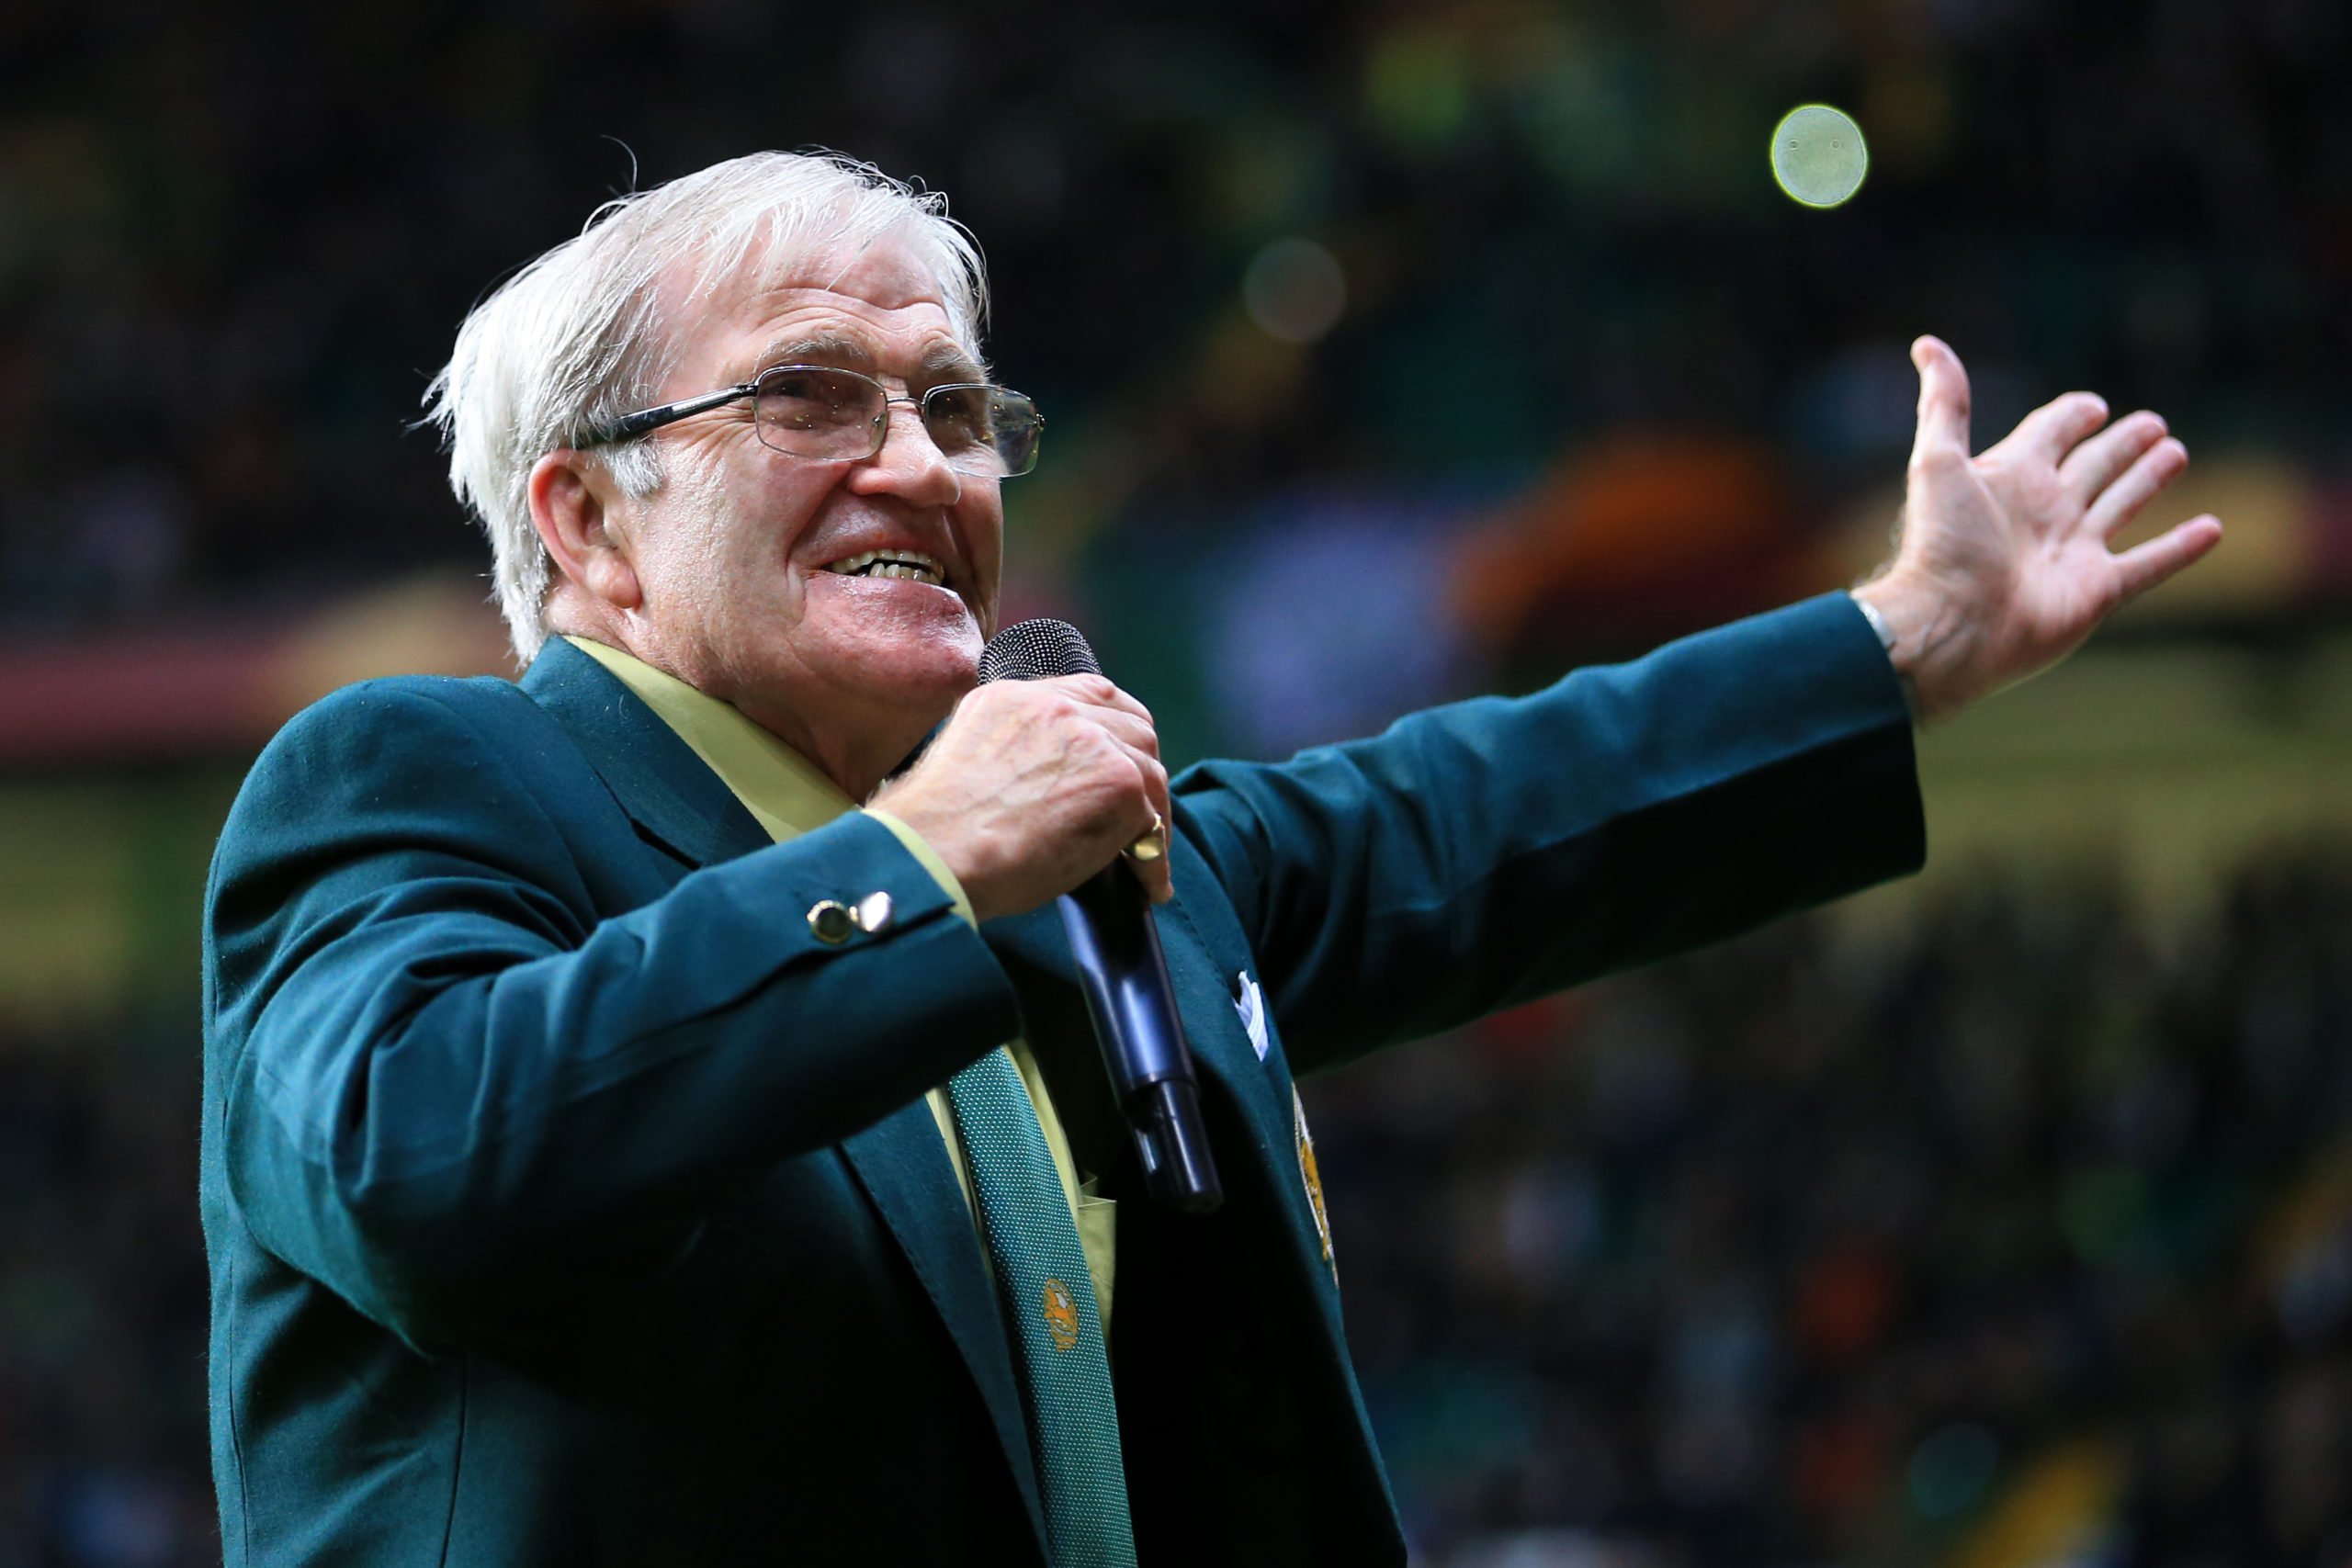 Play inspired by Celtic legend Bertie Auld could be Vegas-bound